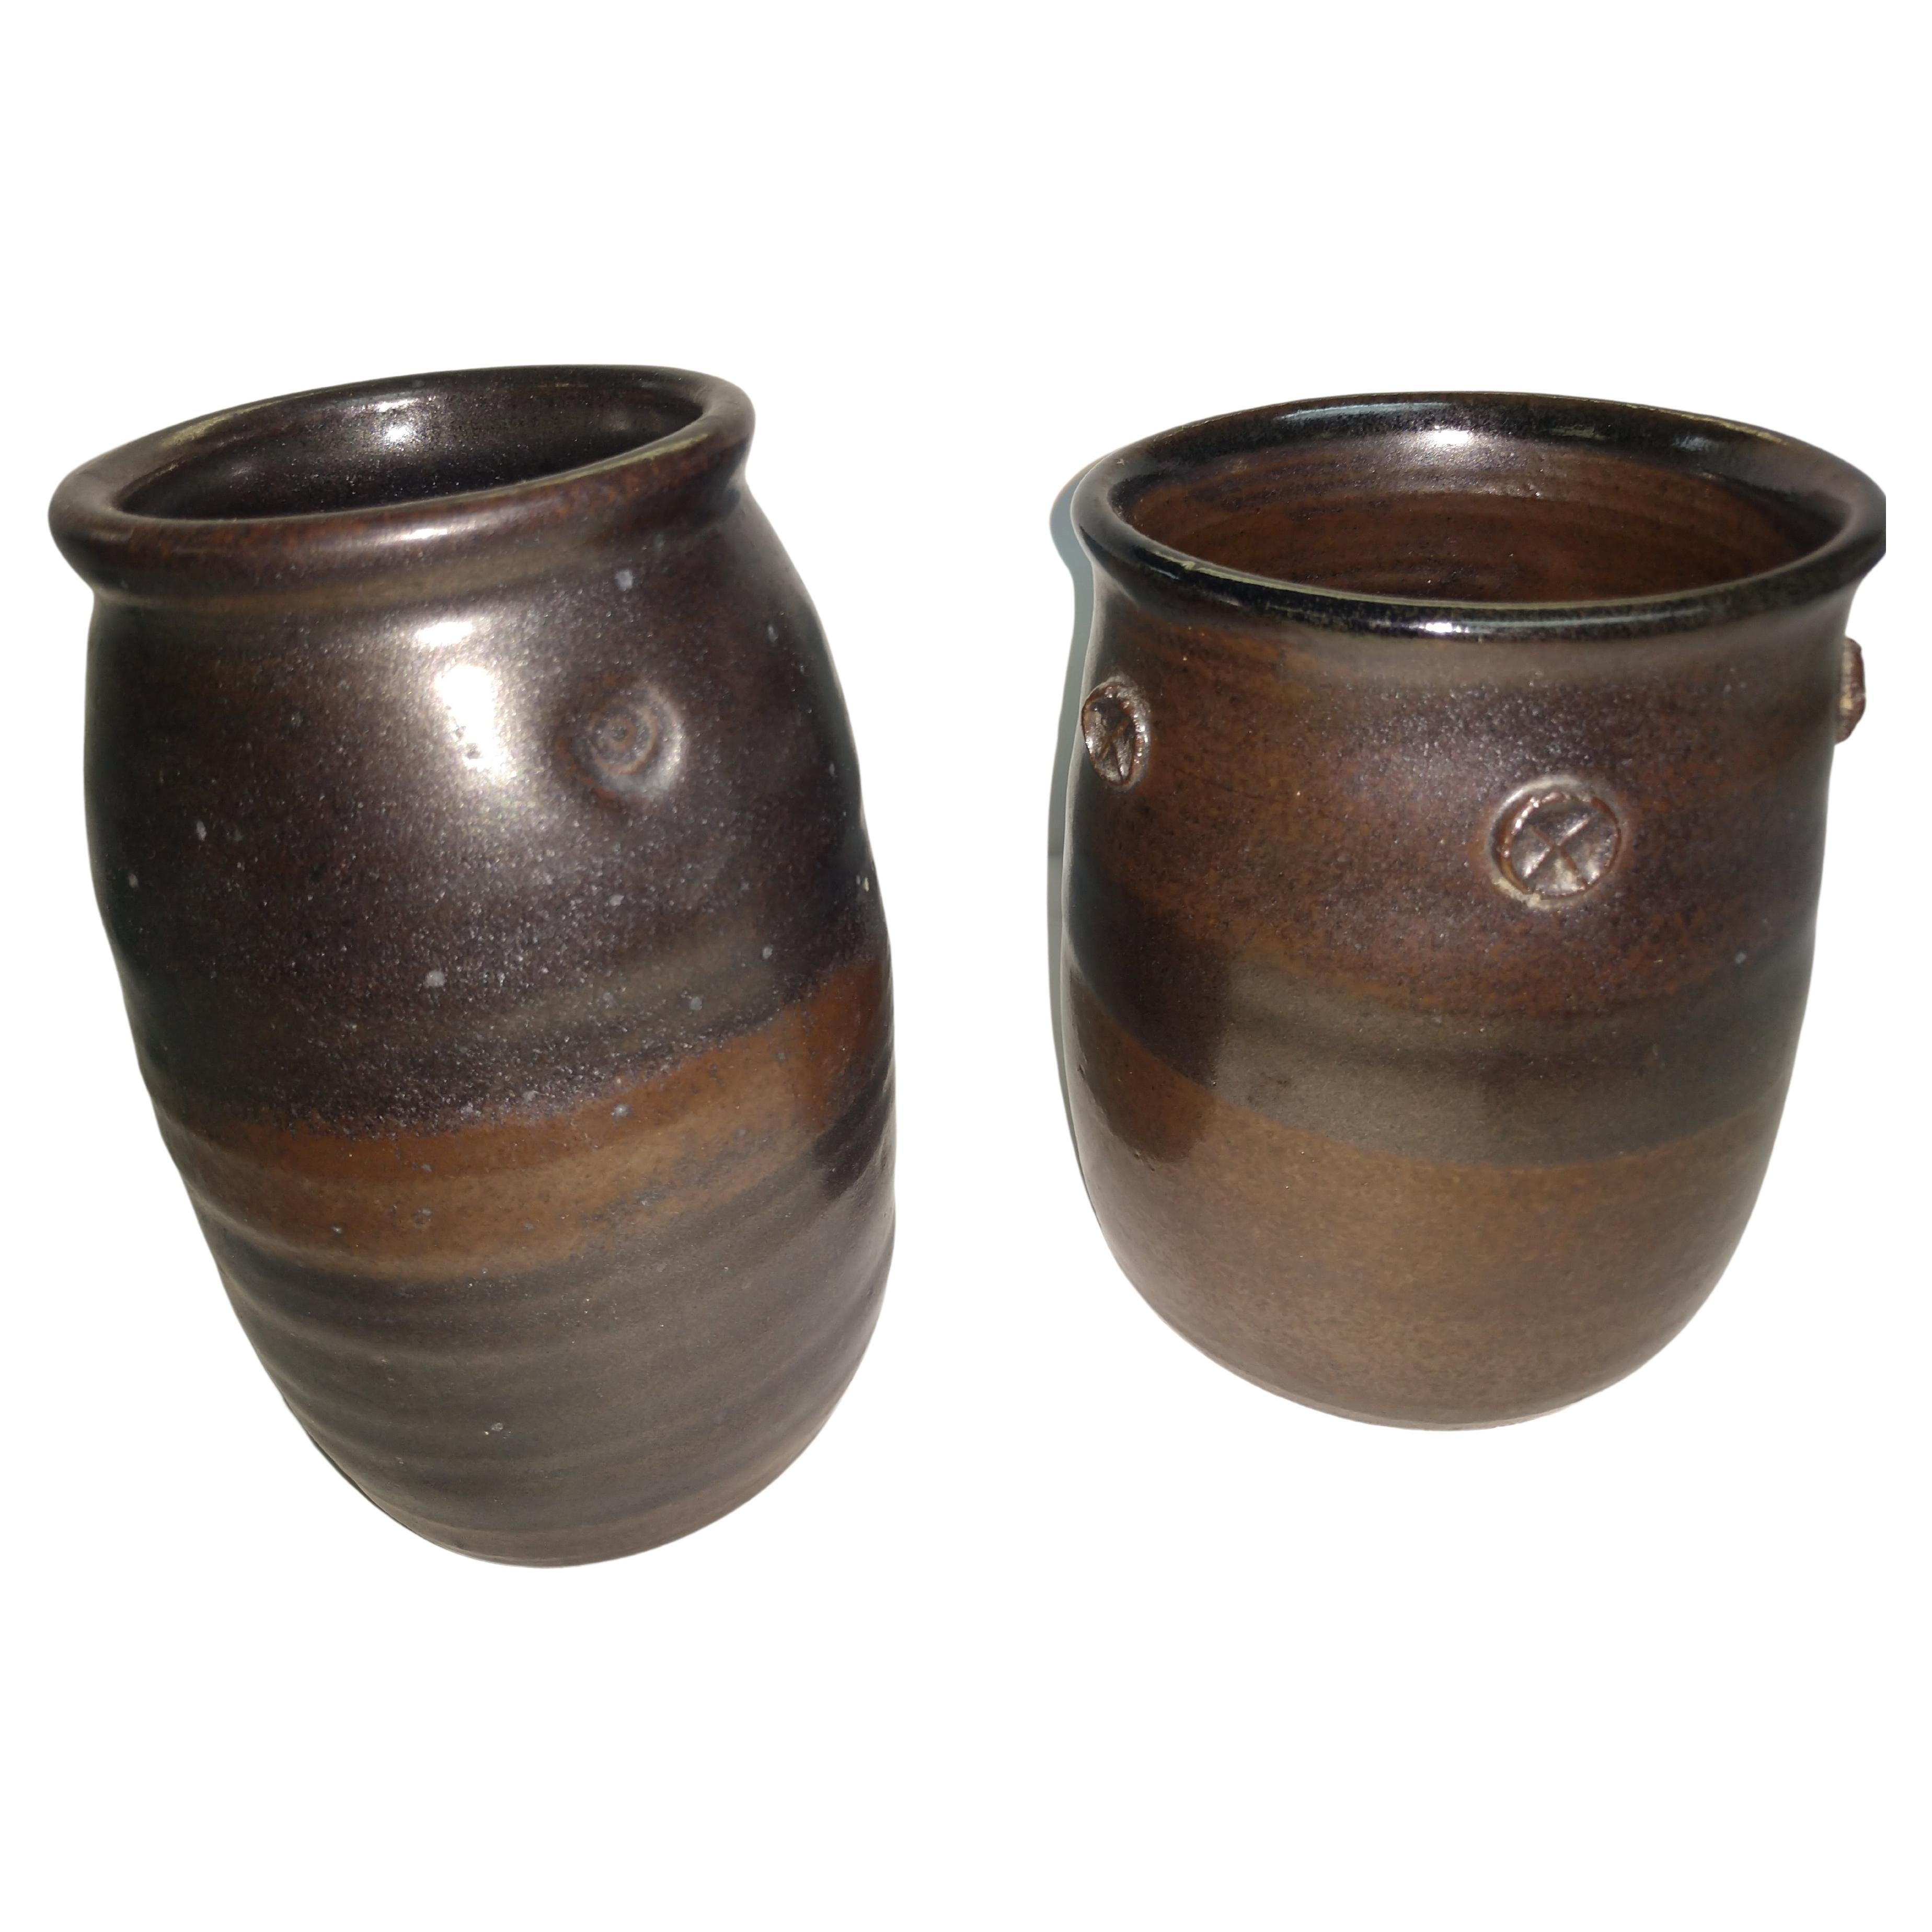 Hand-Crafted Arts & Crafts Hand Thrown Pots & Vases by Herbert Sargent writer producer potter For Sale